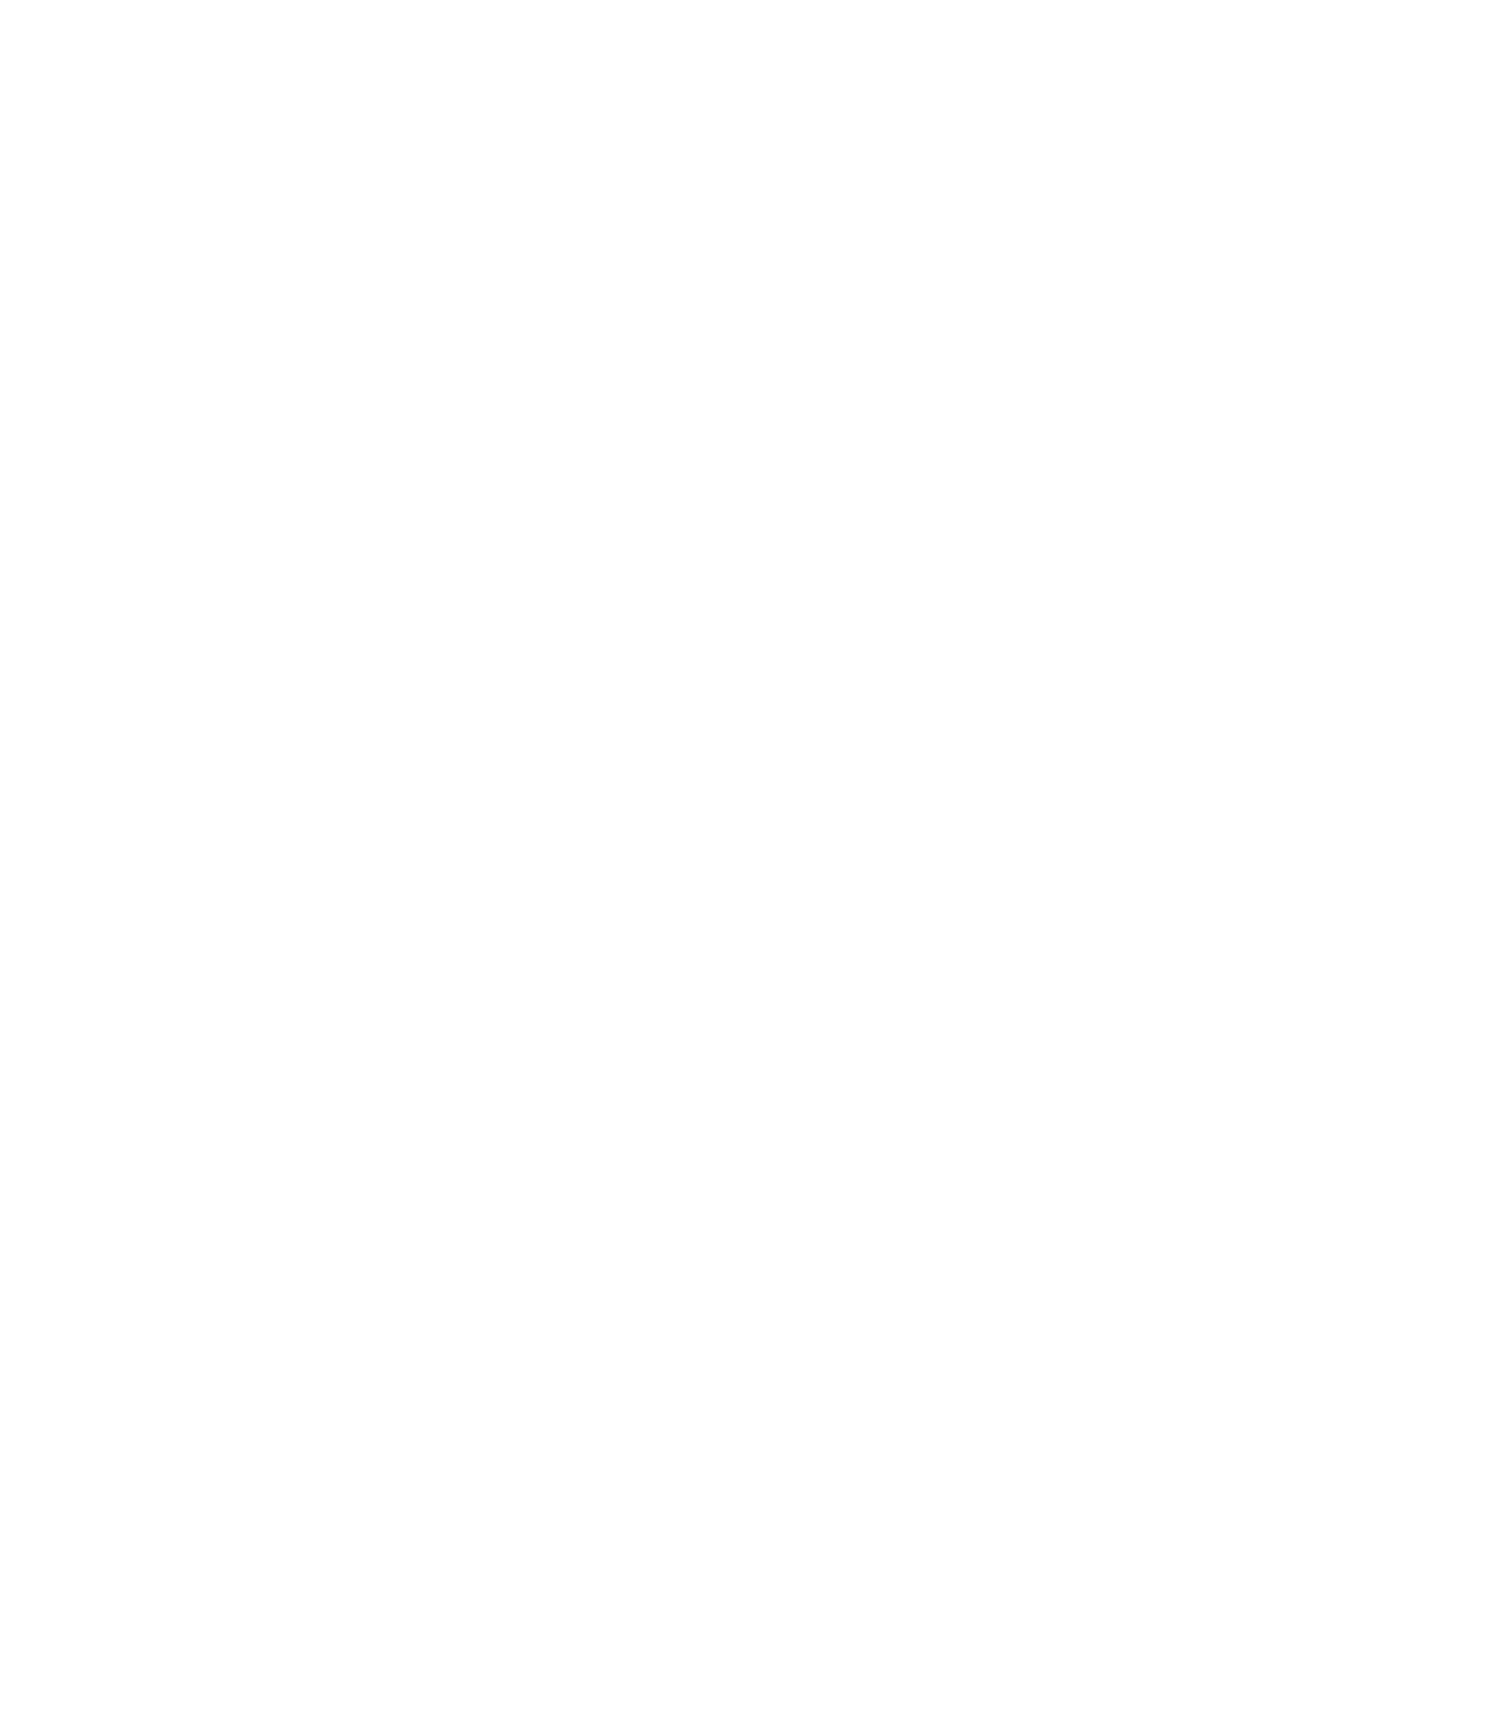 SMART MANUFACTURING SUMMIT, A NEW EVENT DEVOTED TO JAPANESE & EUROPEAN INNOVATIONS FOR INDUSTRY 5.0